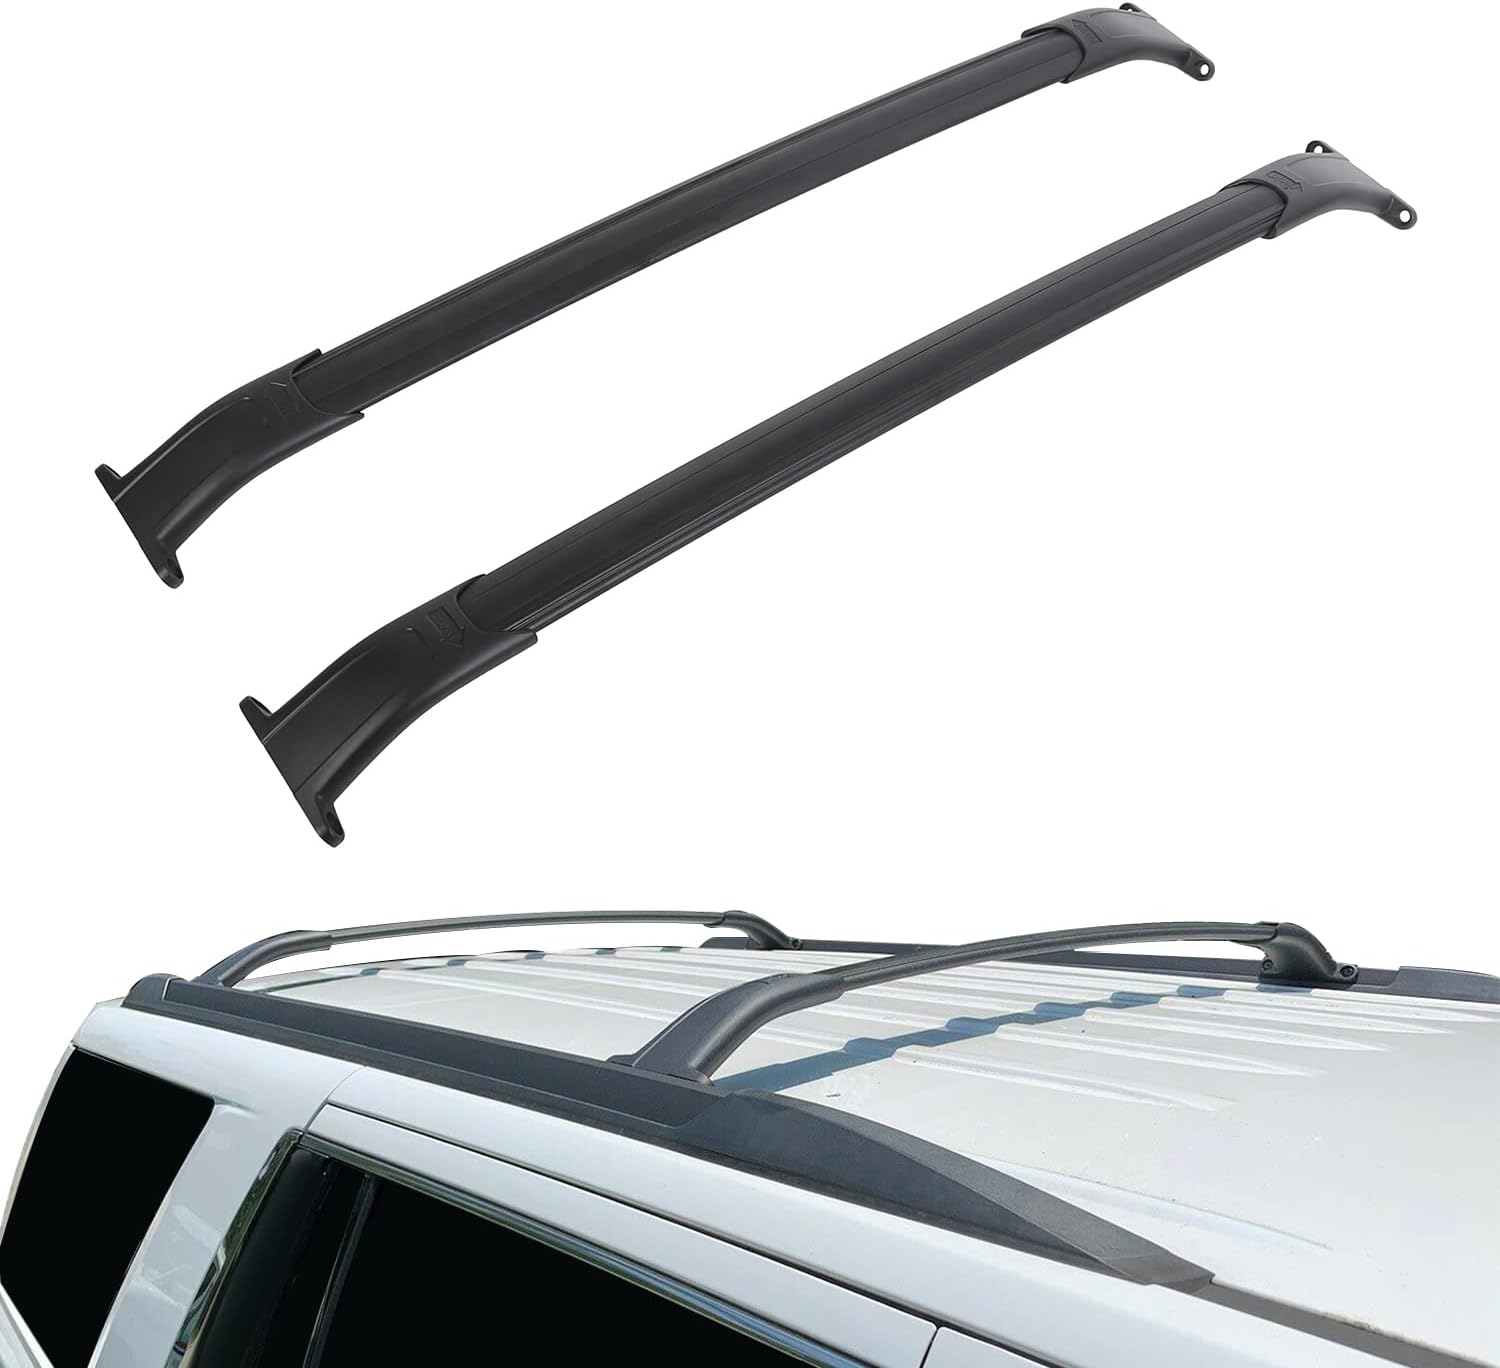 ECOTRIC Roof Rack Cross Bars Compatible with 2015-2020 Chevy Tahoe Suburban Escalade GMC Yukon Luggage Cargo Ladder Crossbars Bike Load